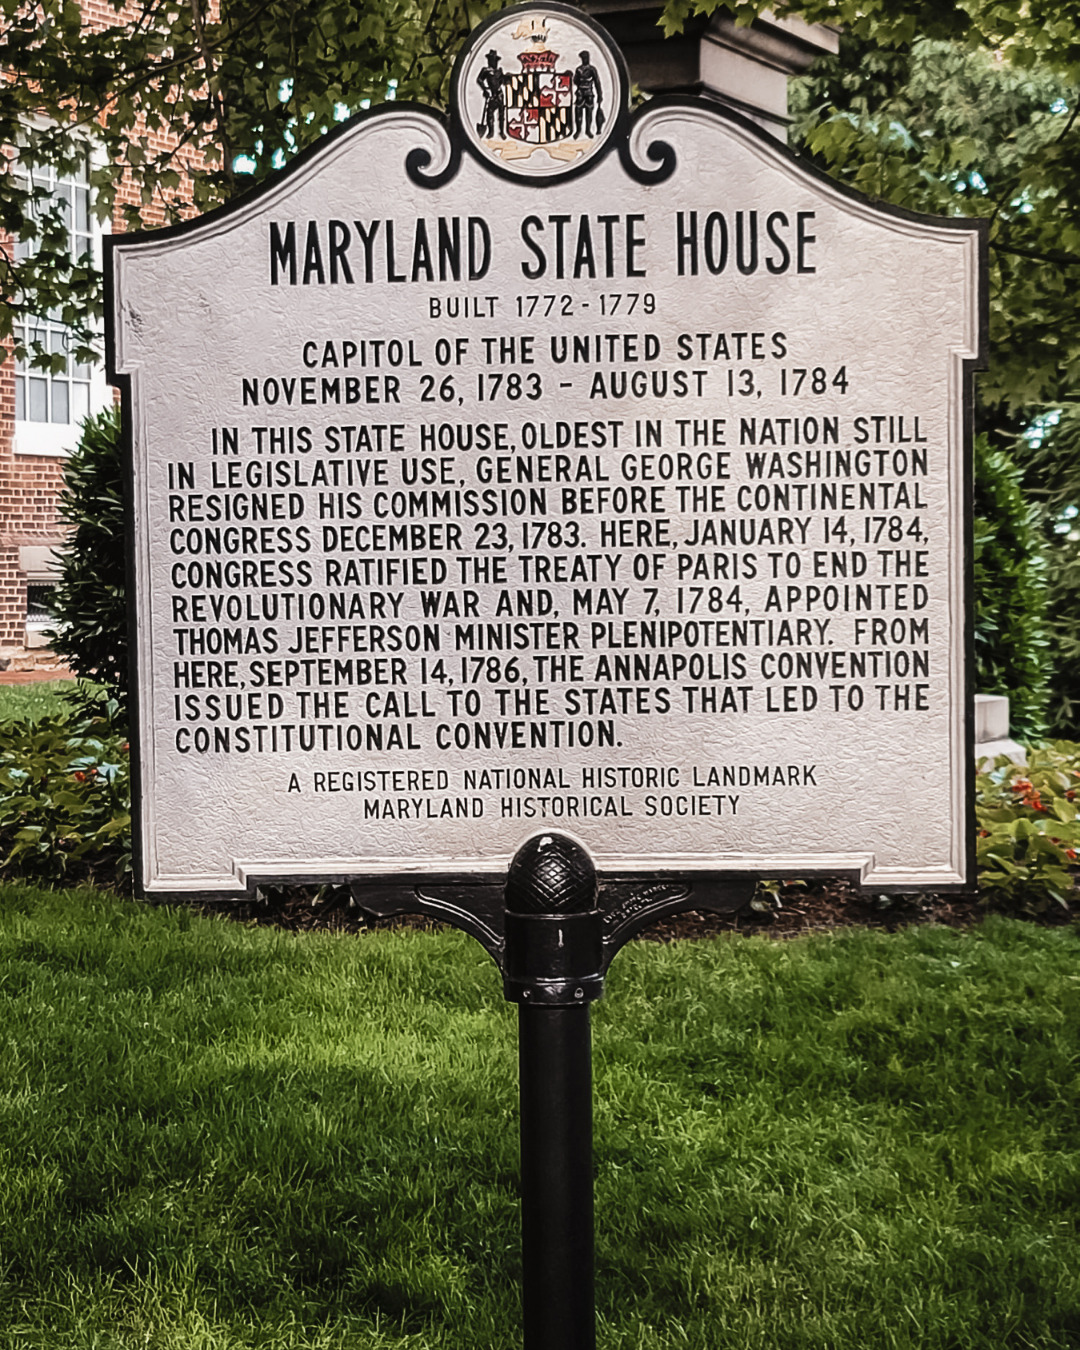 Maryland State House sign